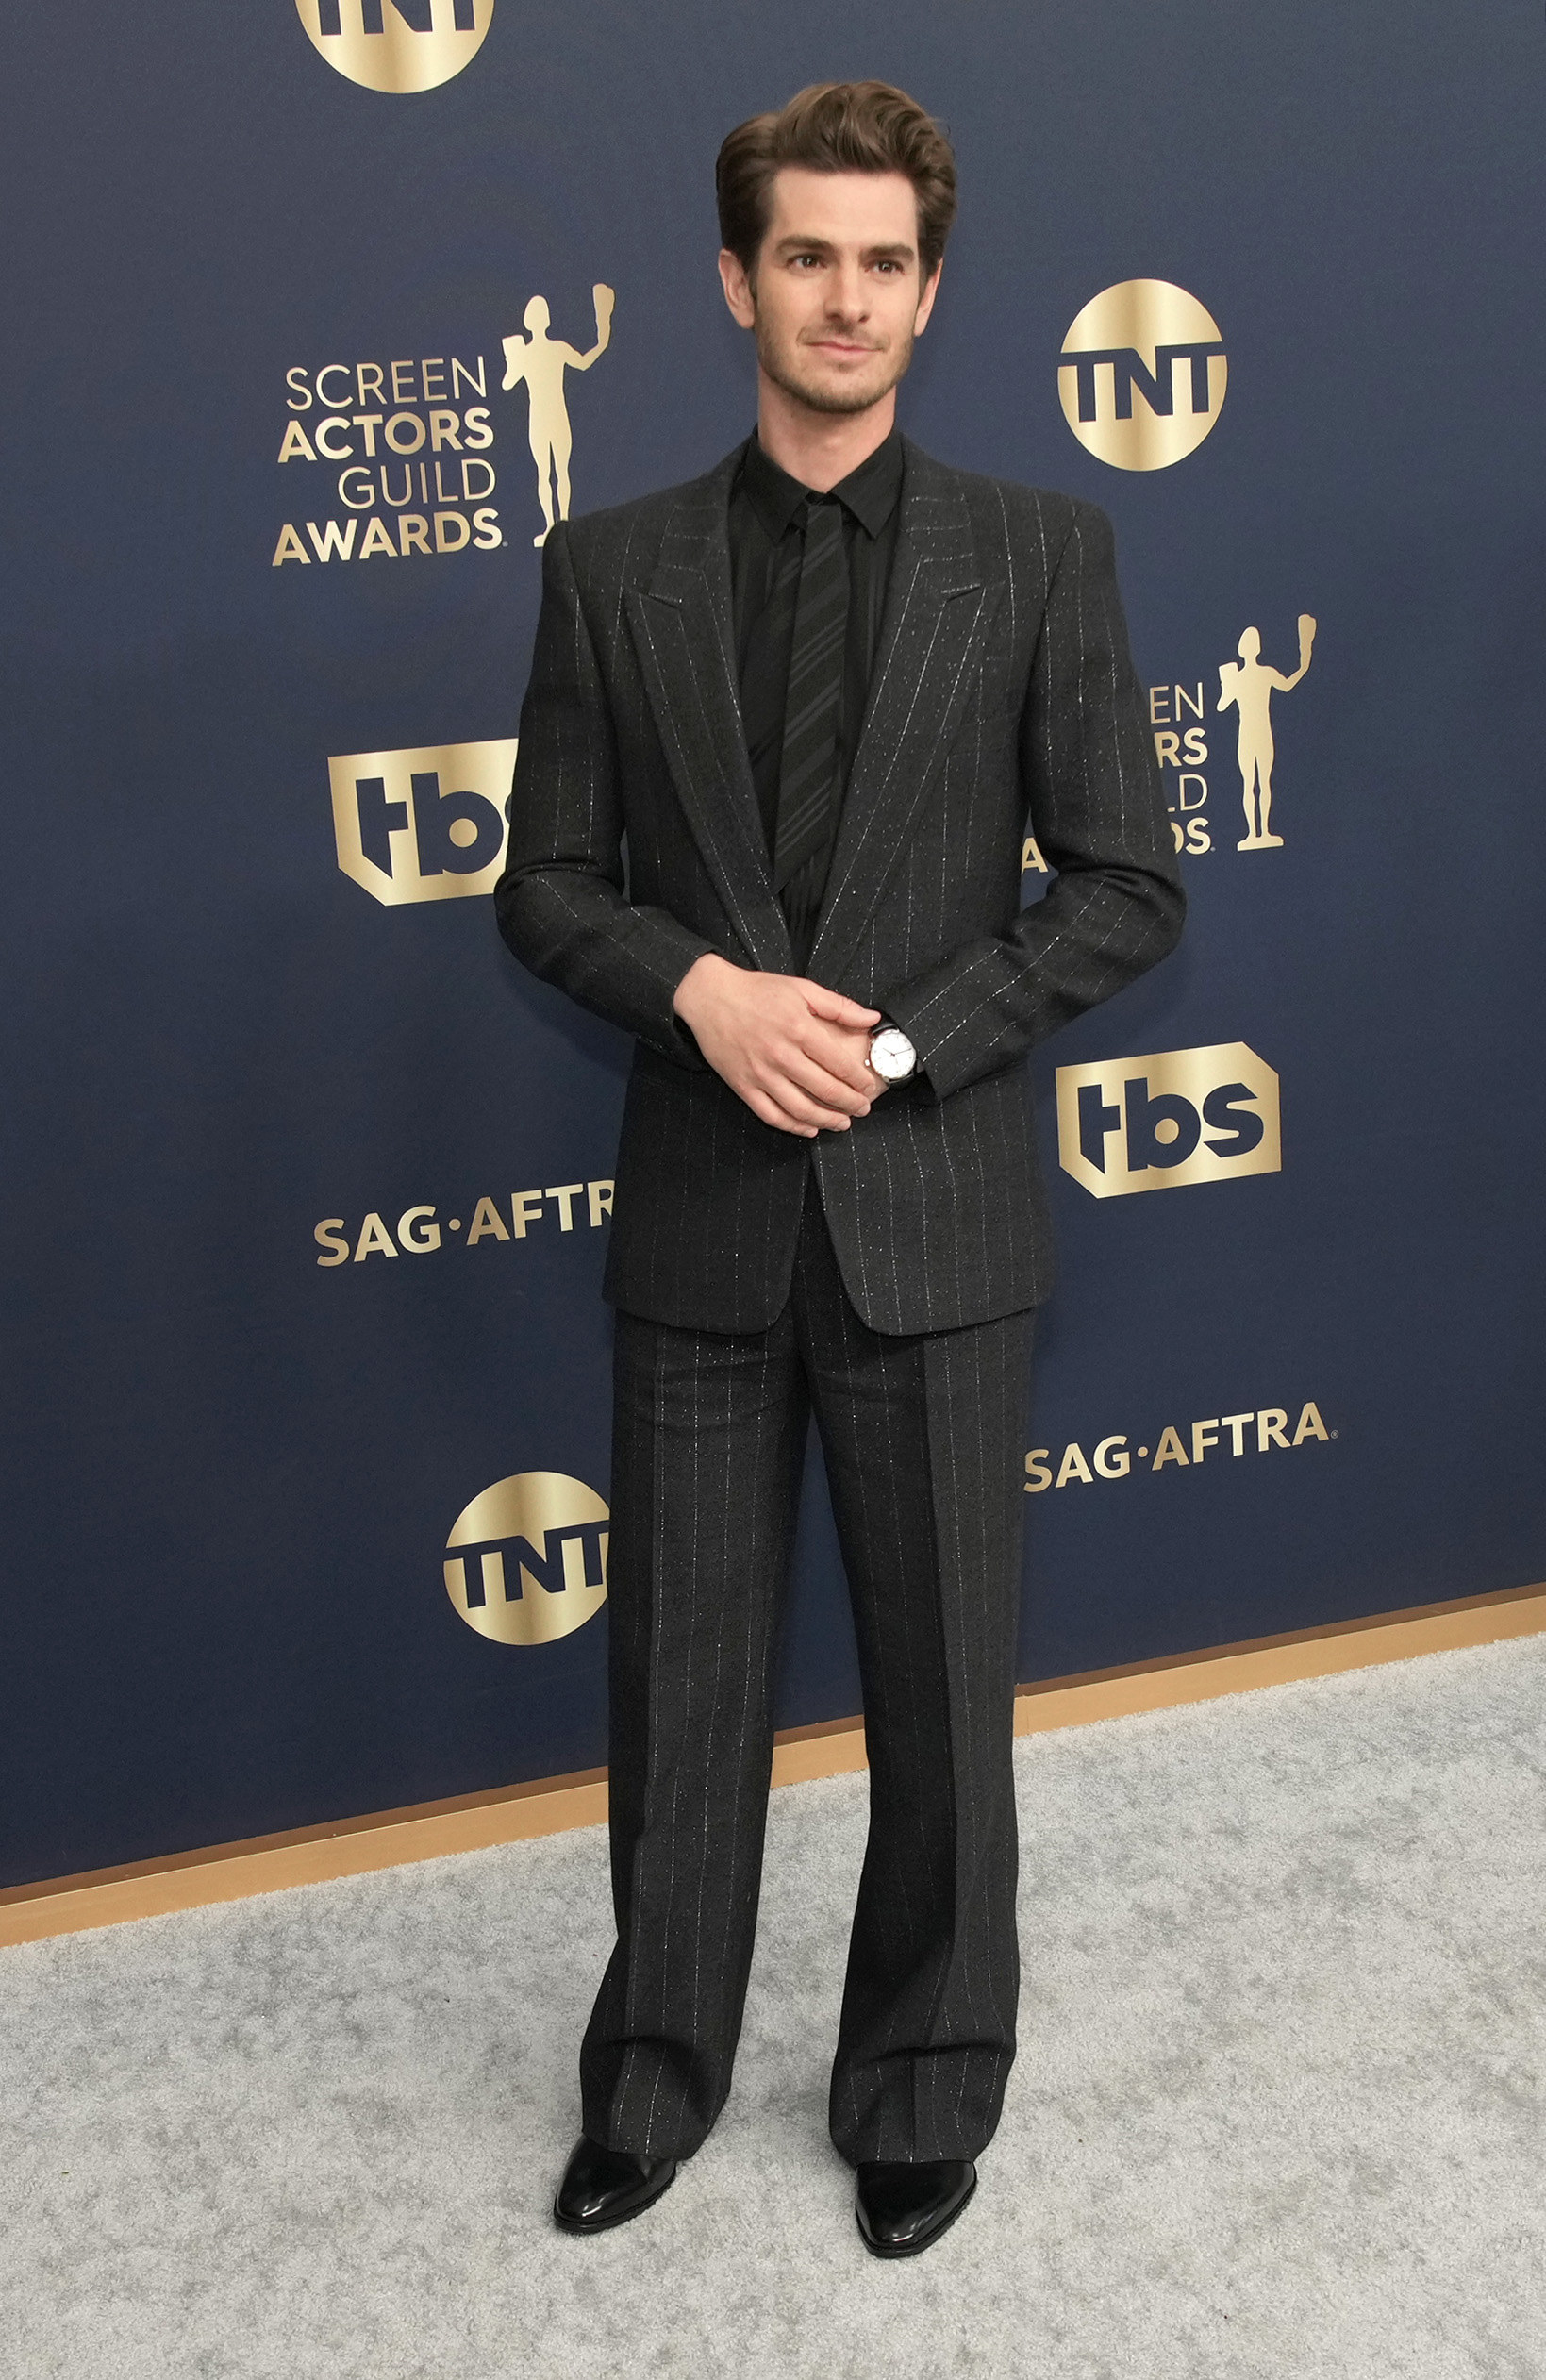 Andrew wears a pinstripe suit with wide leg pants